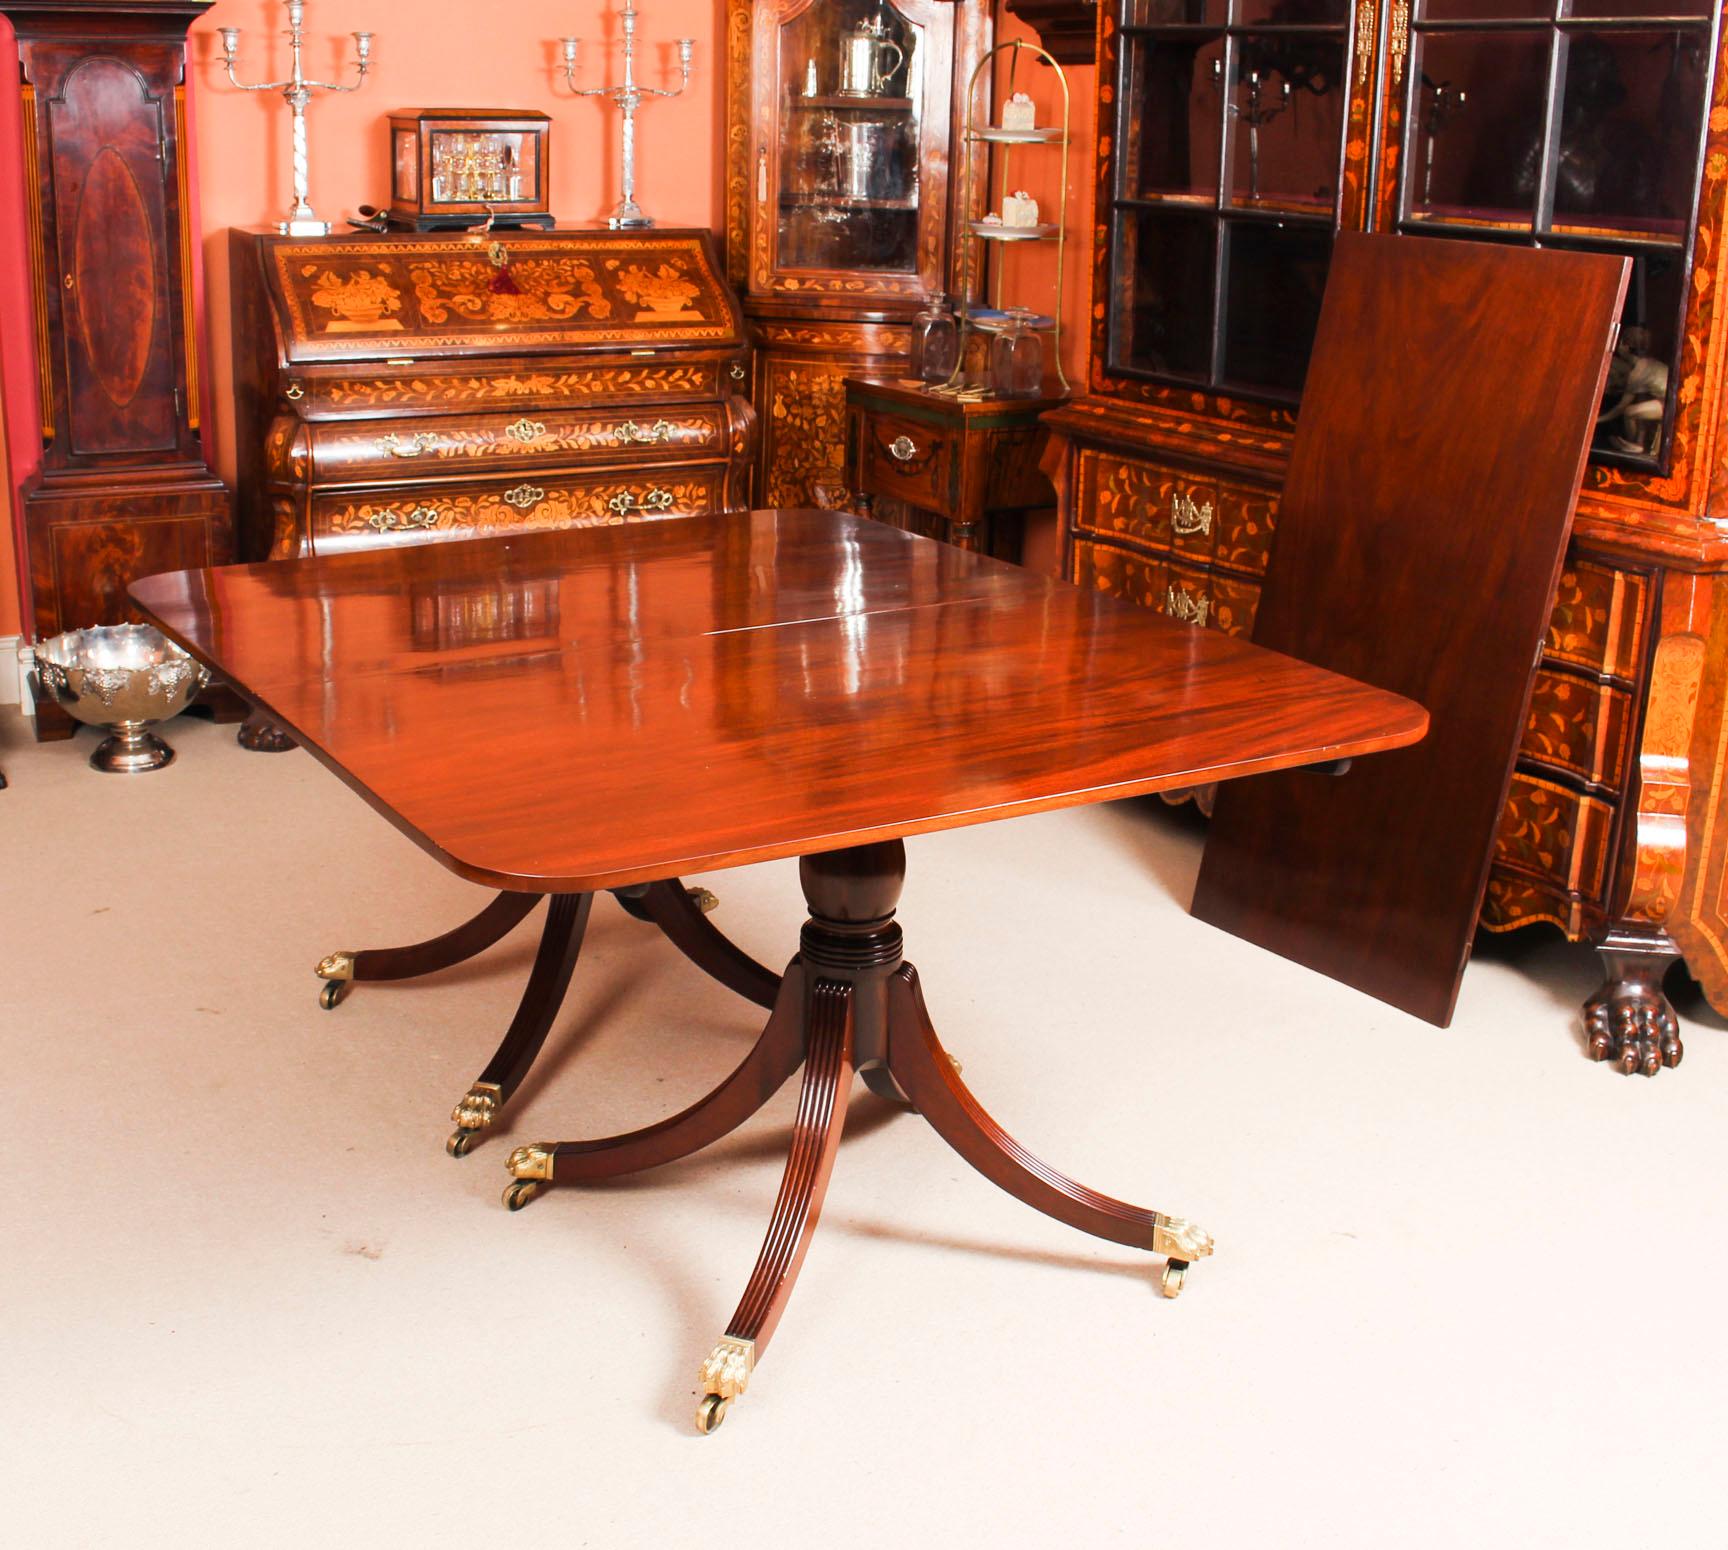 Early 19th Century Antique Flame Mahogany Twin Pillar Regency Dining Table 19th Century